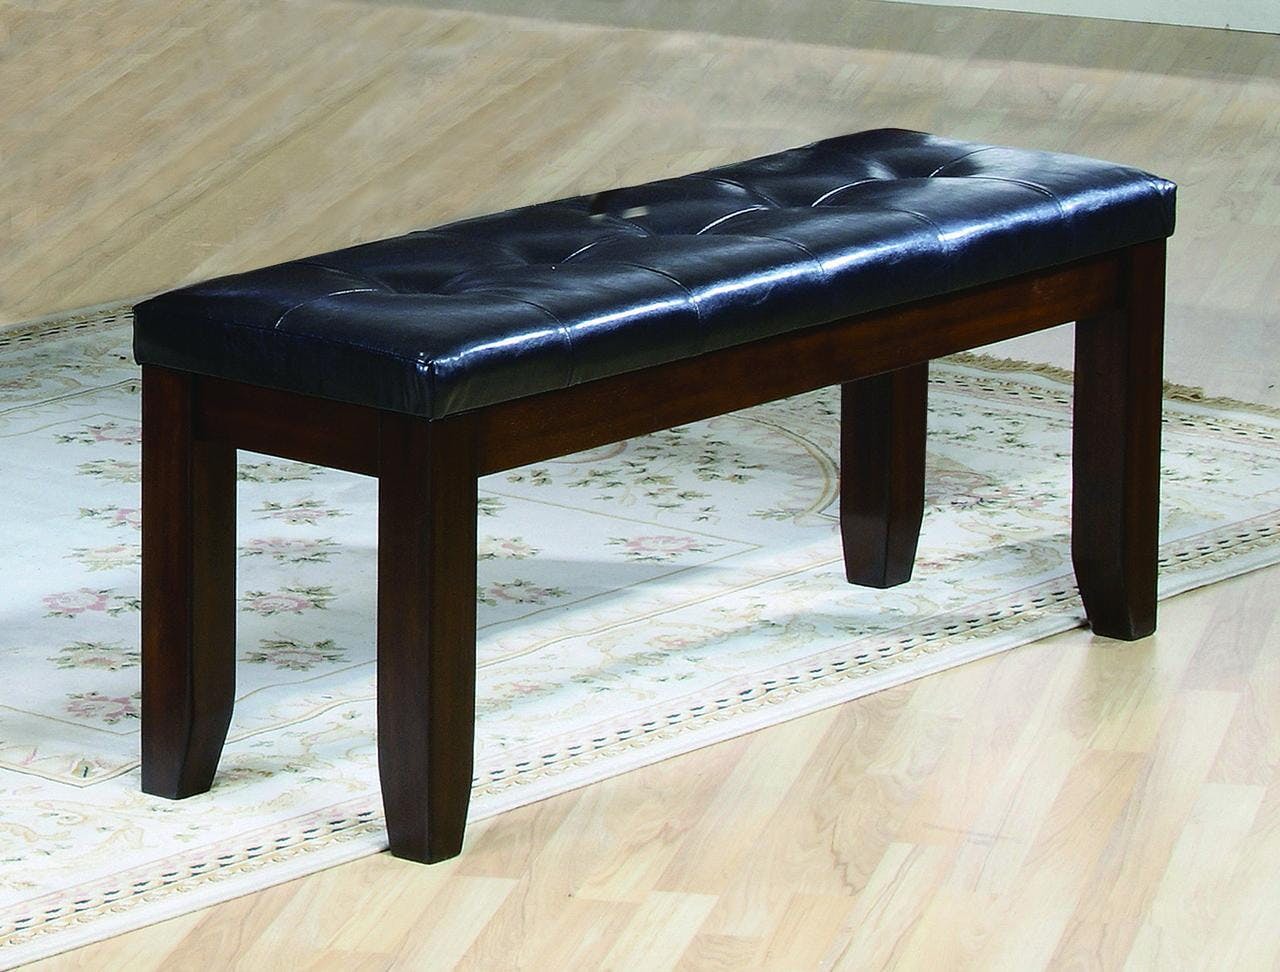 Modern Cherry Brown 48" Bench with Dark Faux Leather Tufted Seat